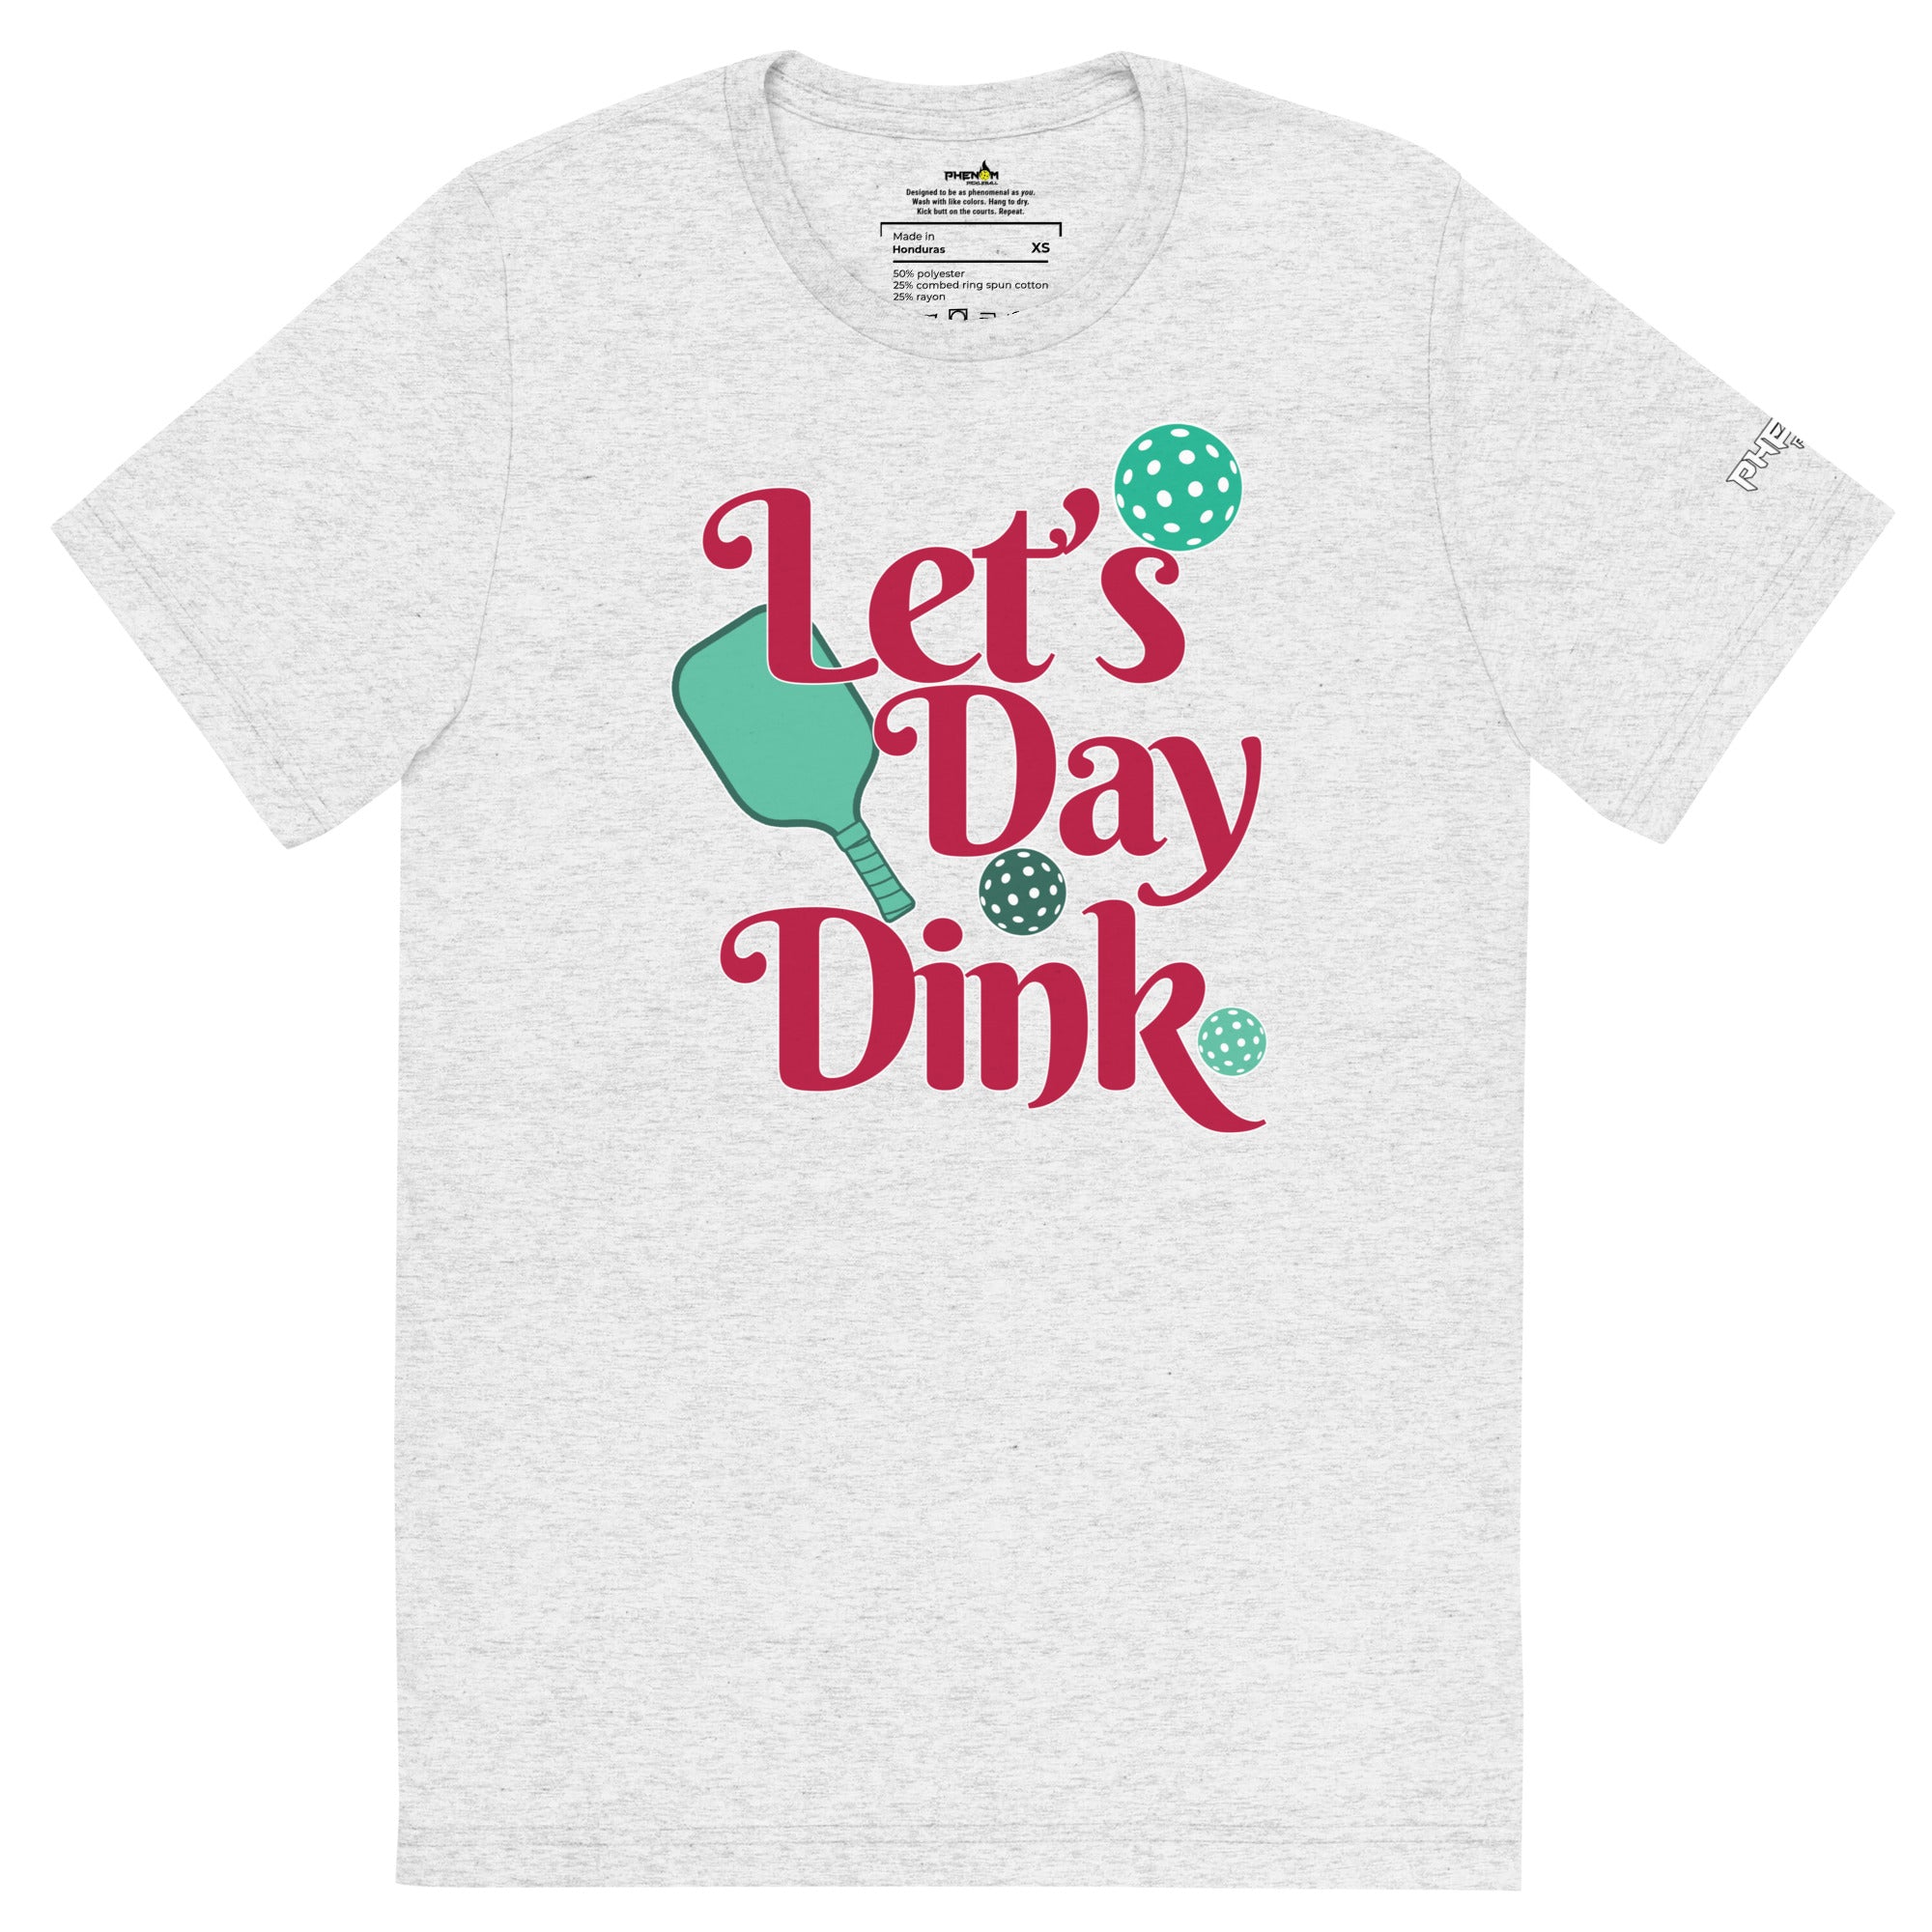 heather white let's day dink pickleball shirt performance apparel athletic top front view